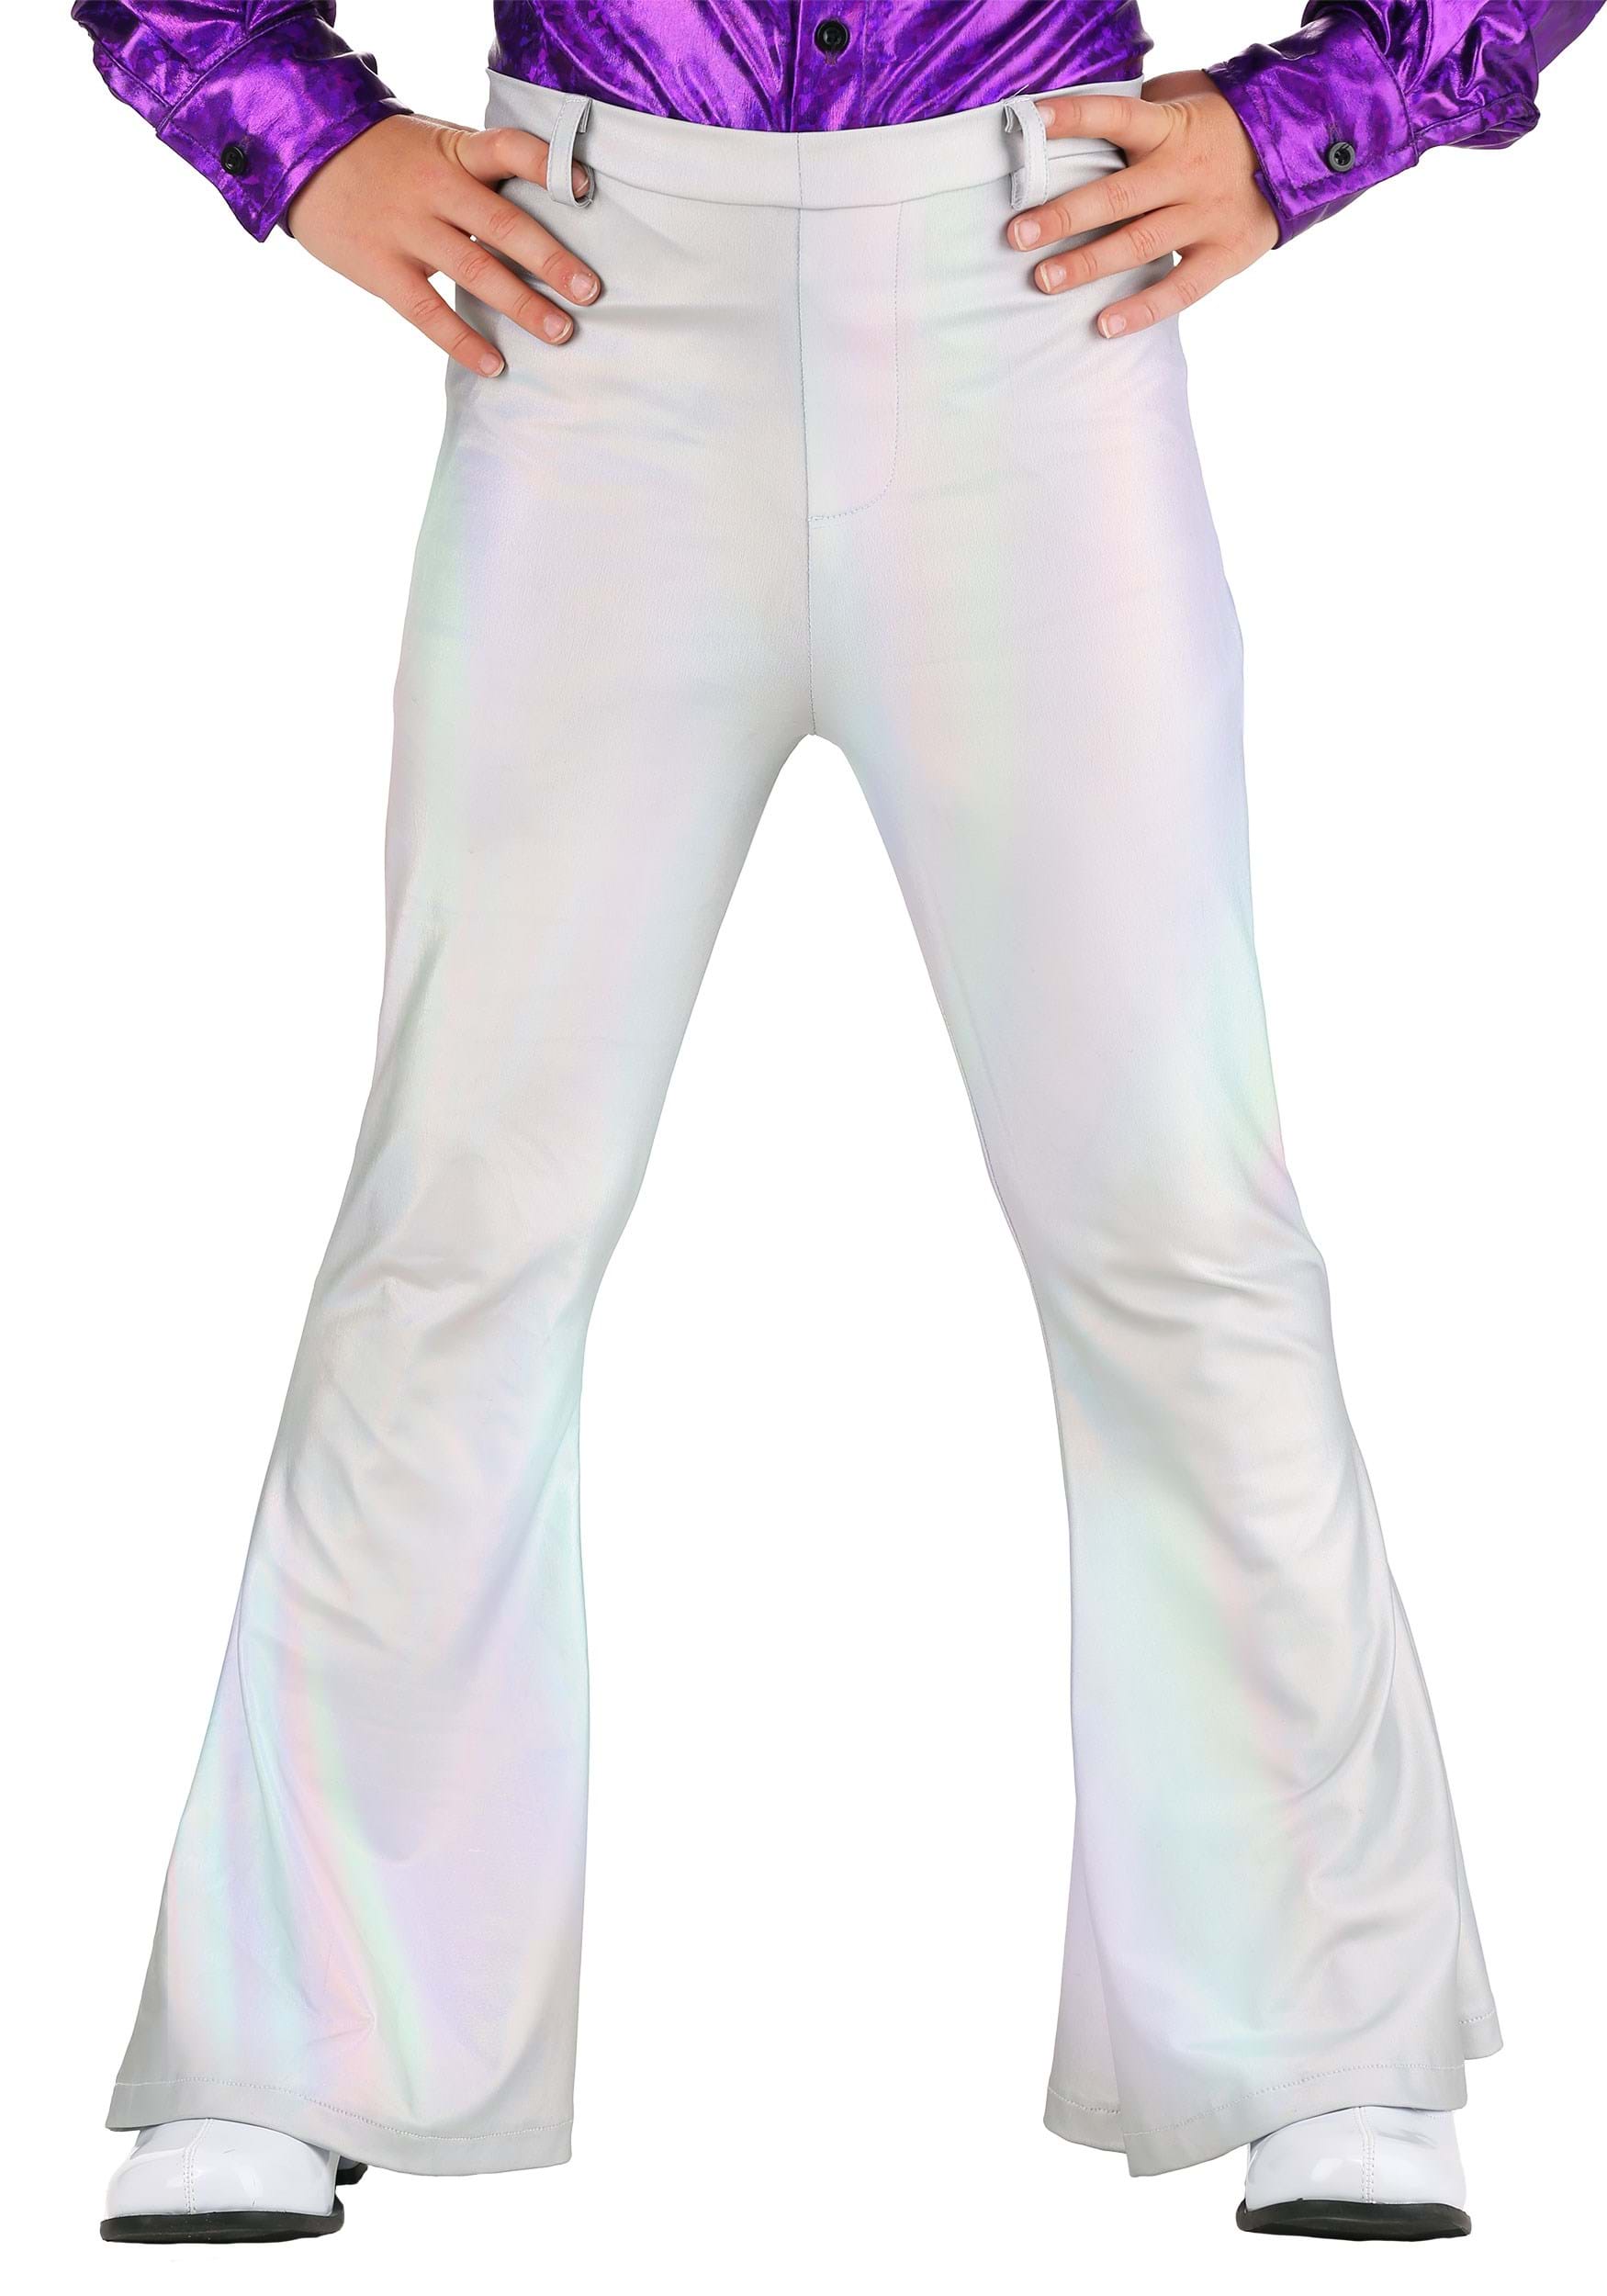 https://images.halloweencostumes.ca/products/68334/1-1/holographic-disco-pants-for-kids.jpg